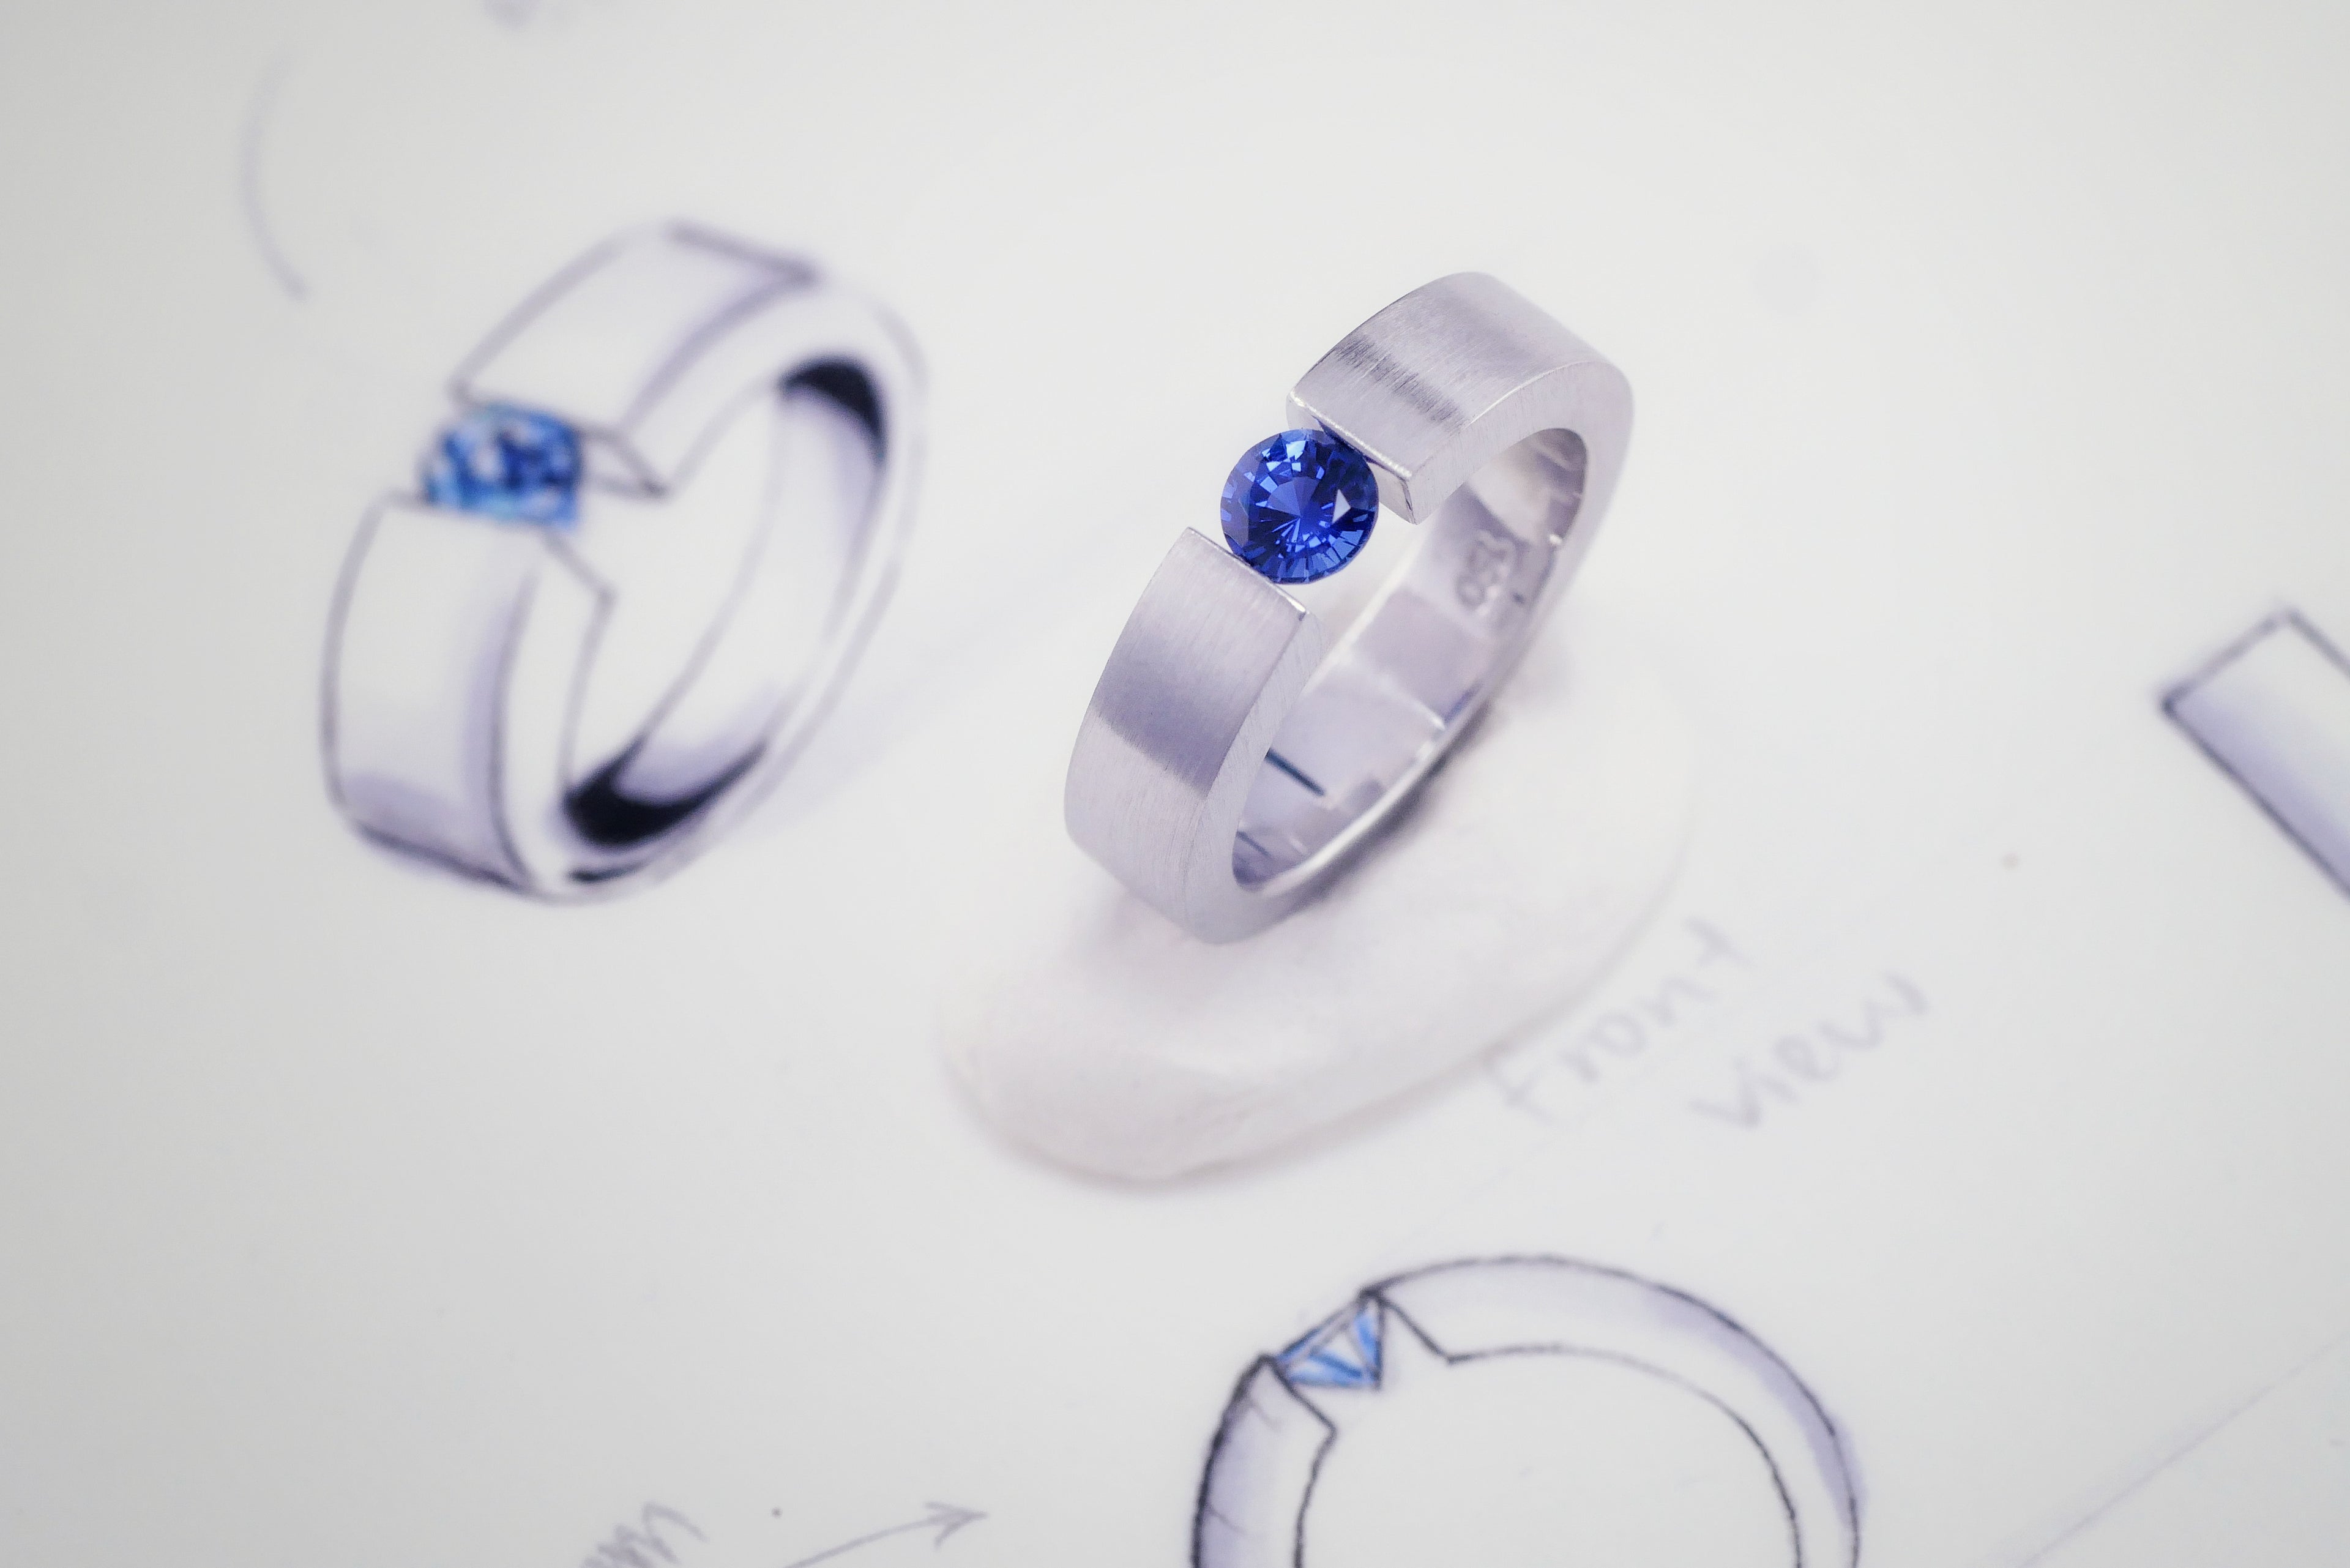 18K white gold tension ring with a suspended blue sapphire